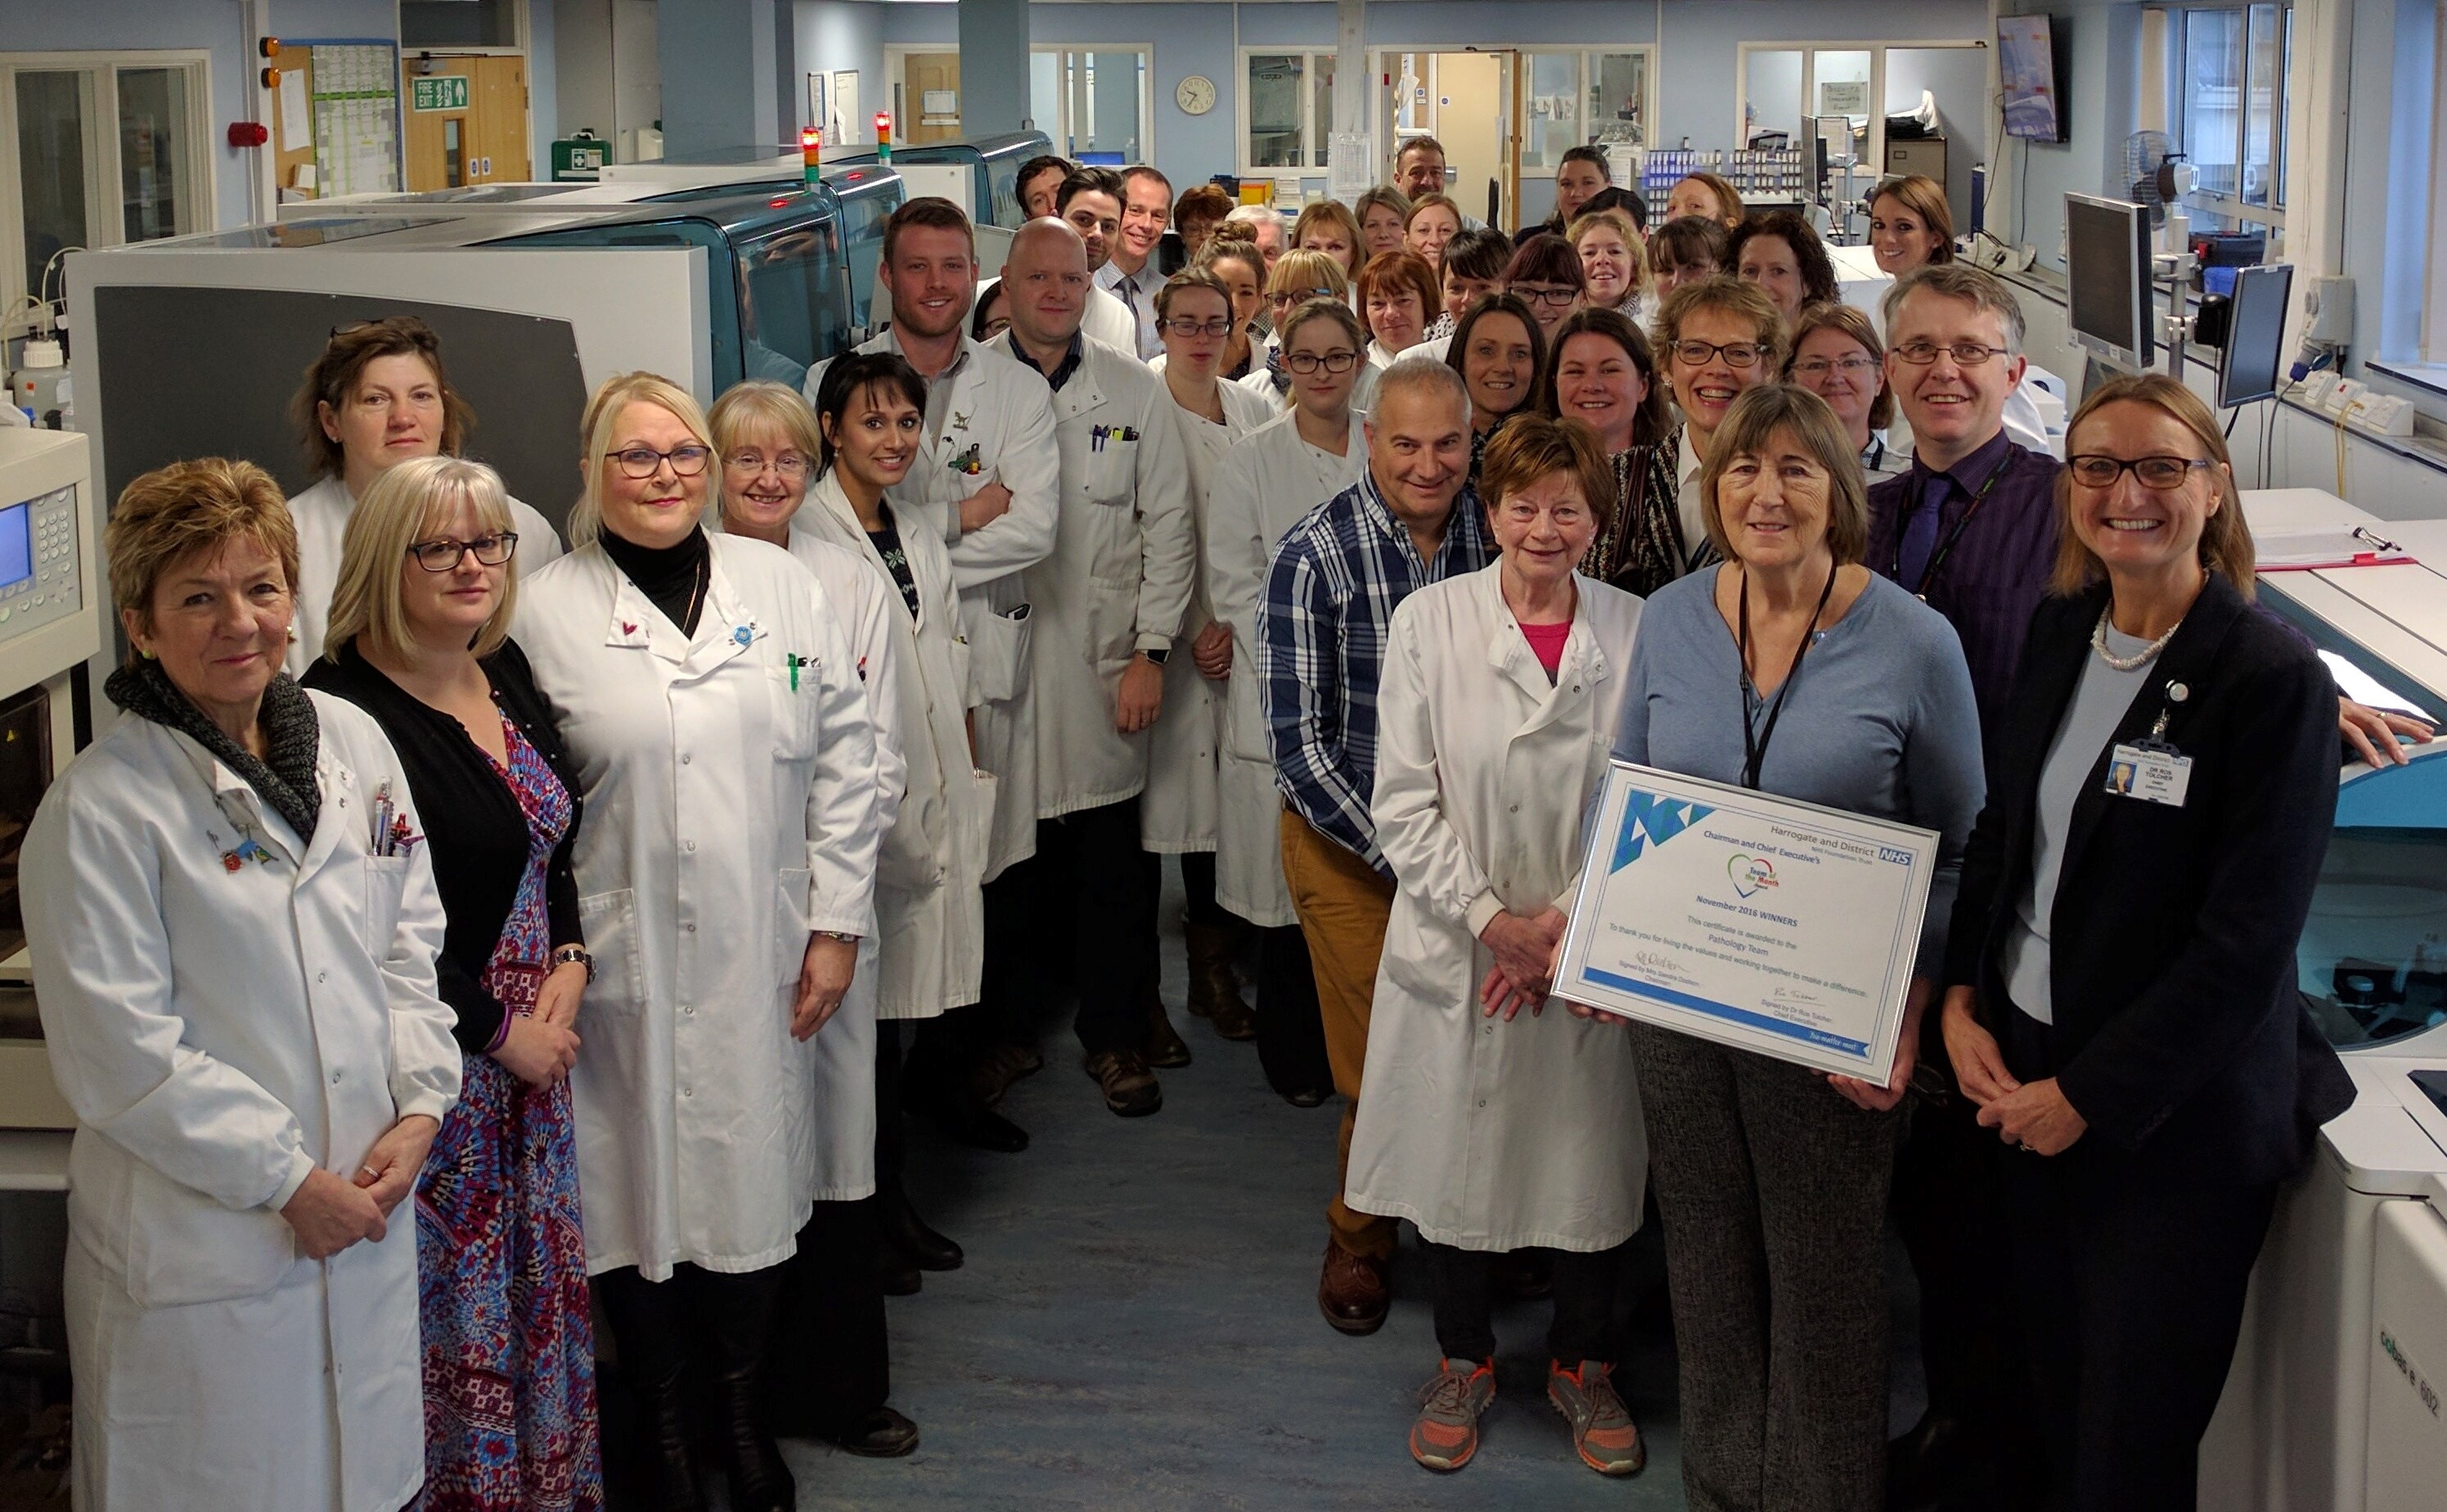 November Team of the Month winners, Pathology presented with their award.